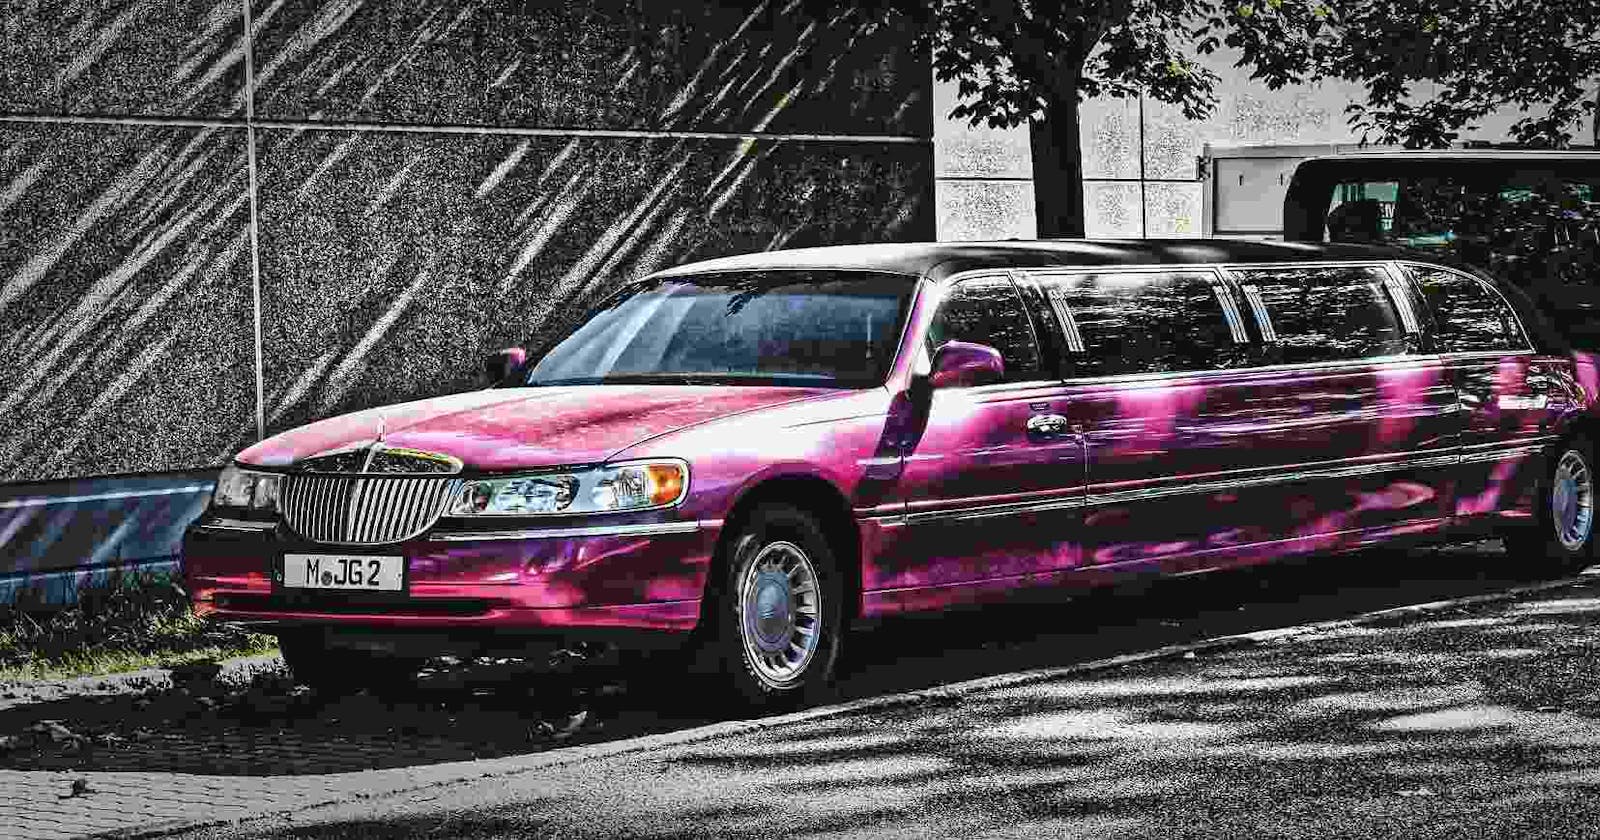 Find A Reliable Limo Service Near Me To Take You To Sporting Events